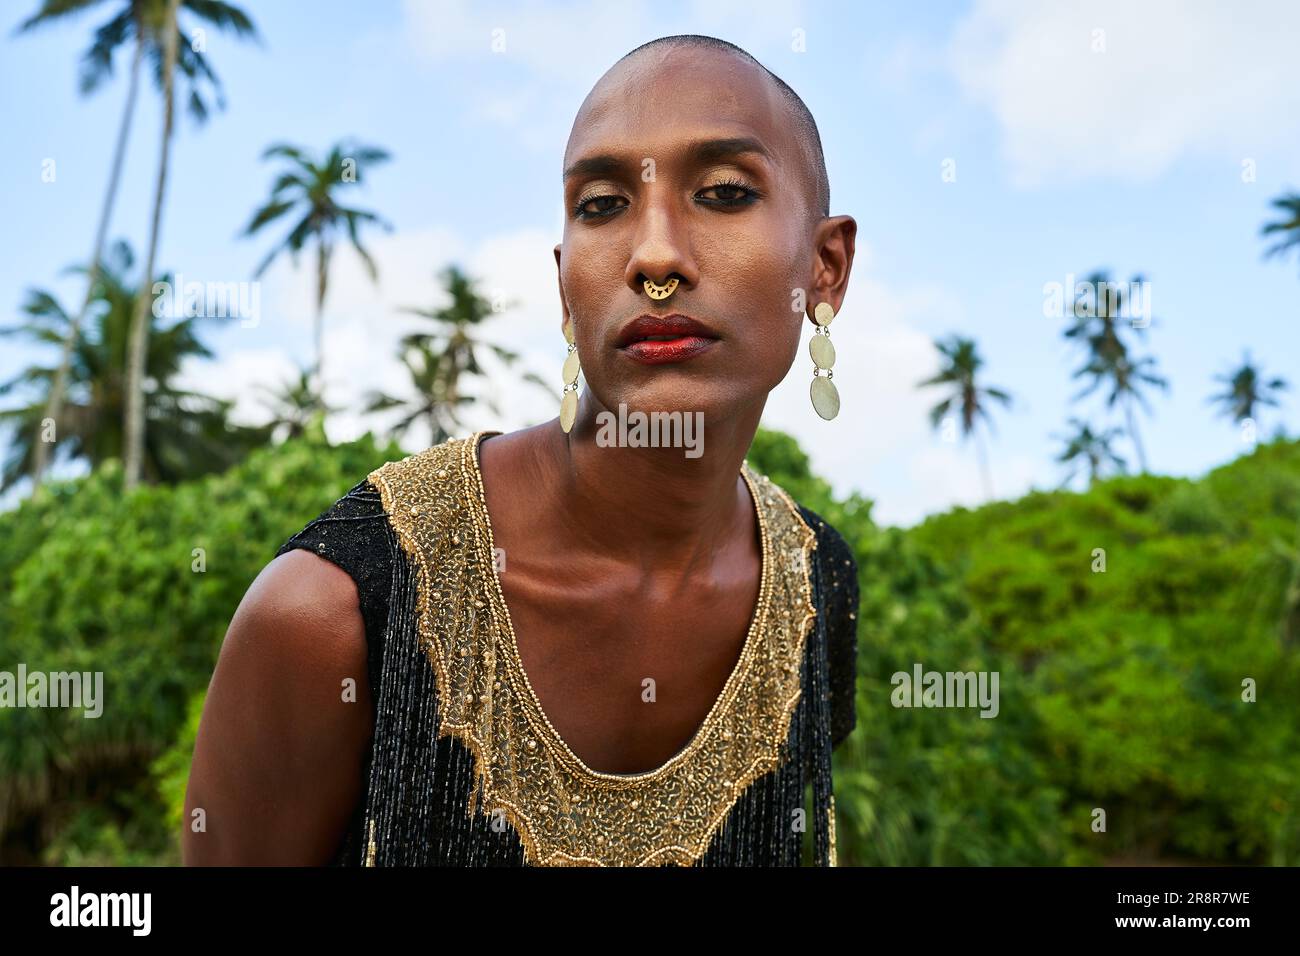 Flamboyant gay black man with luxury golden jewelry poses on scenic ocean  beach. Gender fluid ethnic fashion model brass rings, bracelet, earrings,  accessories looks stands with sophisticated posture. Stock Photo | Adobe